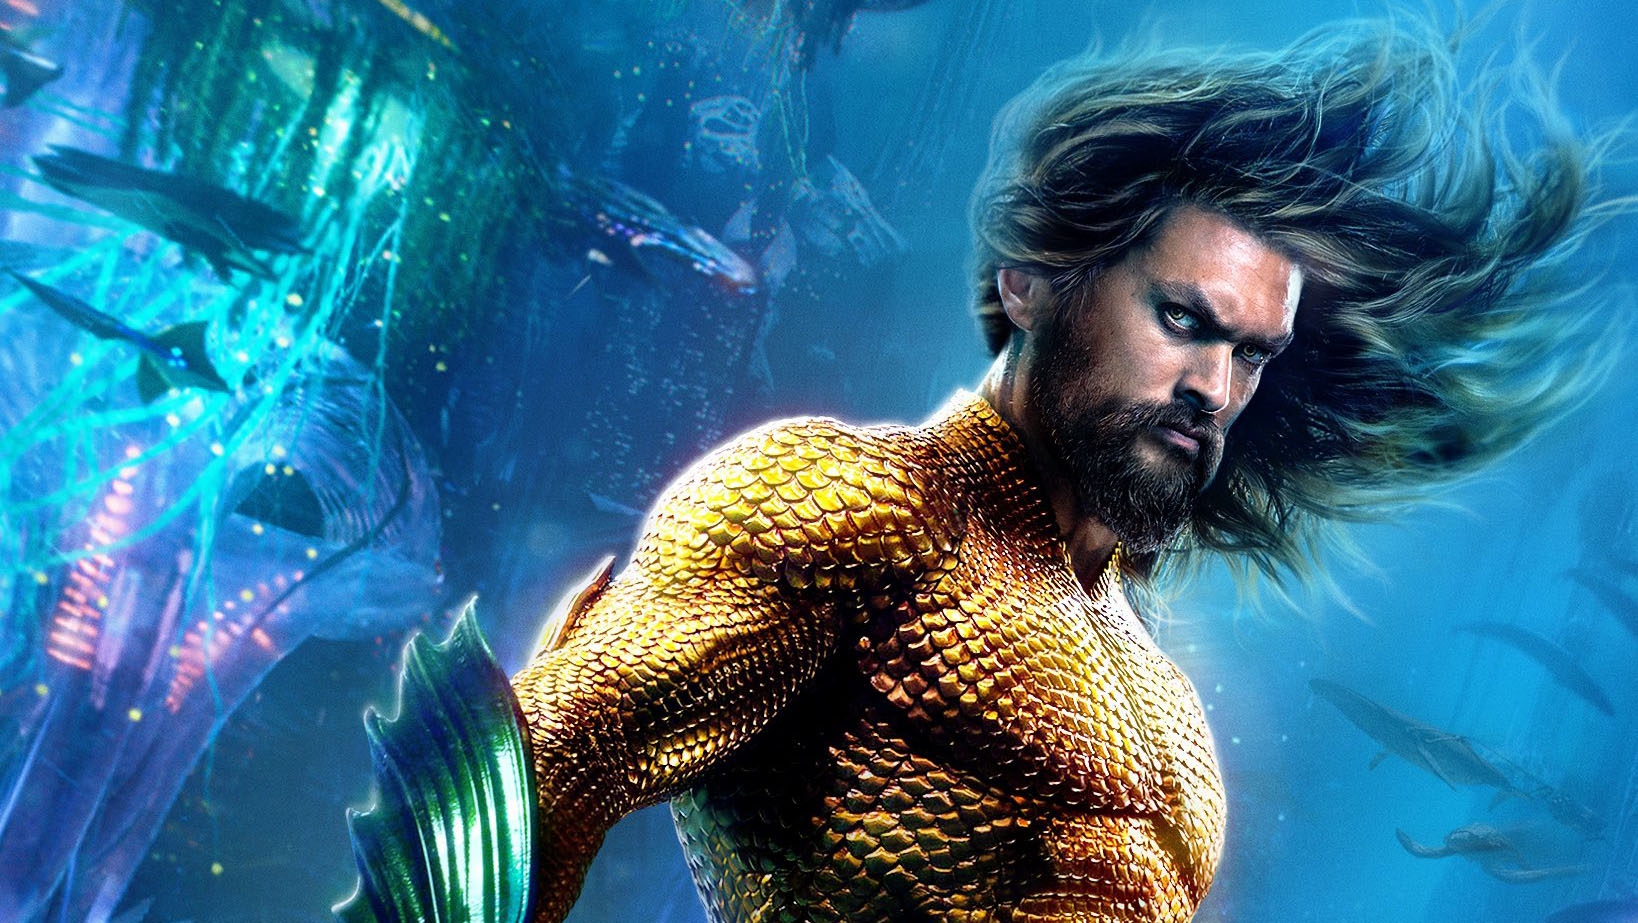 Aquaman Review: 4 Ups And 3 Downs Of The Film